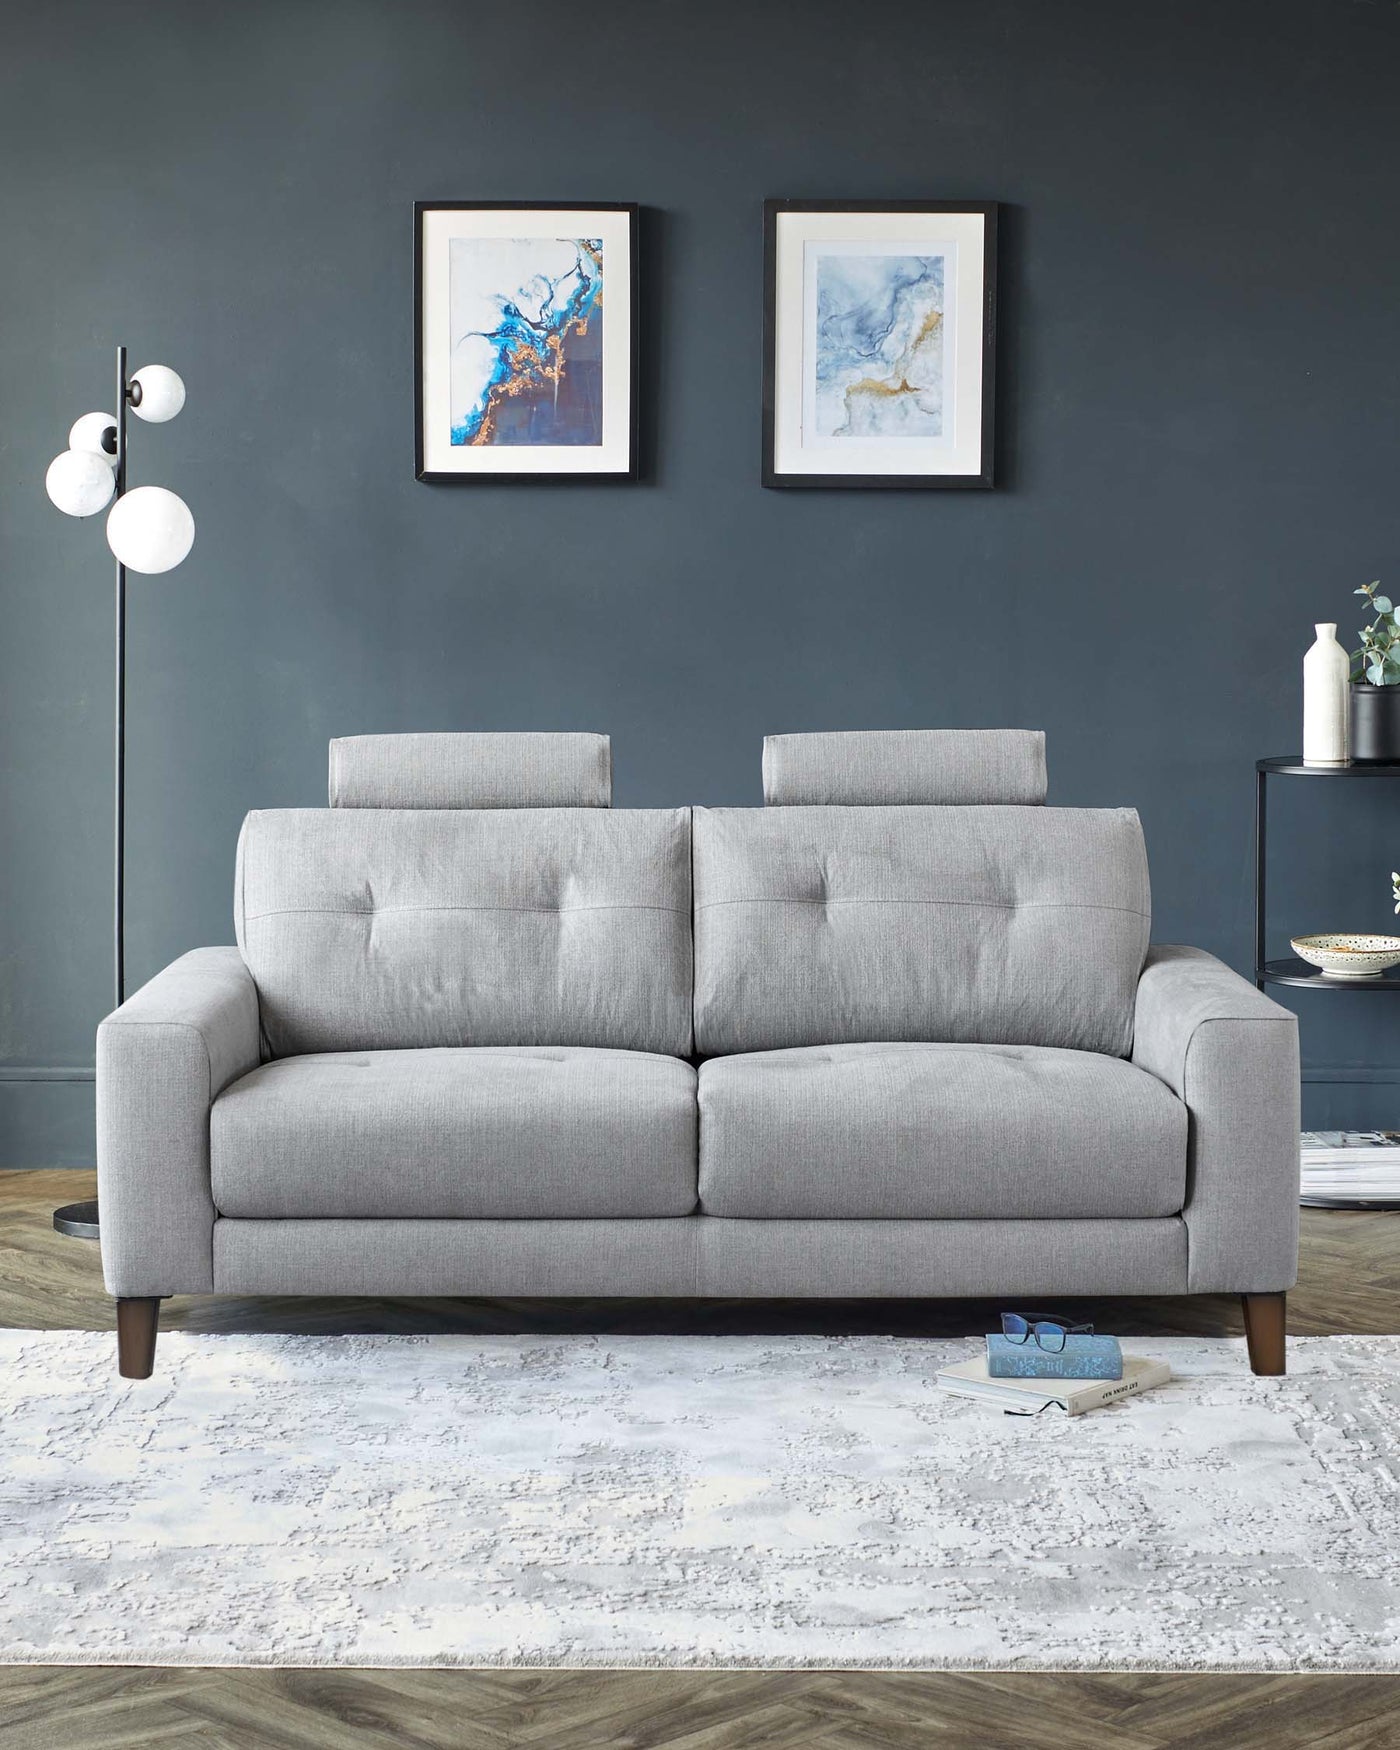 Modern three-seater sofa with a minimalist design, featuring a smooth, grey upholstery and button-tufted back cushions. The sofa stands on four round, tapered wooden legs, presented on a textured white area rug against a dark wall, creating a contrast that highlights the couch's sleek lines and contemporary aesthetic.